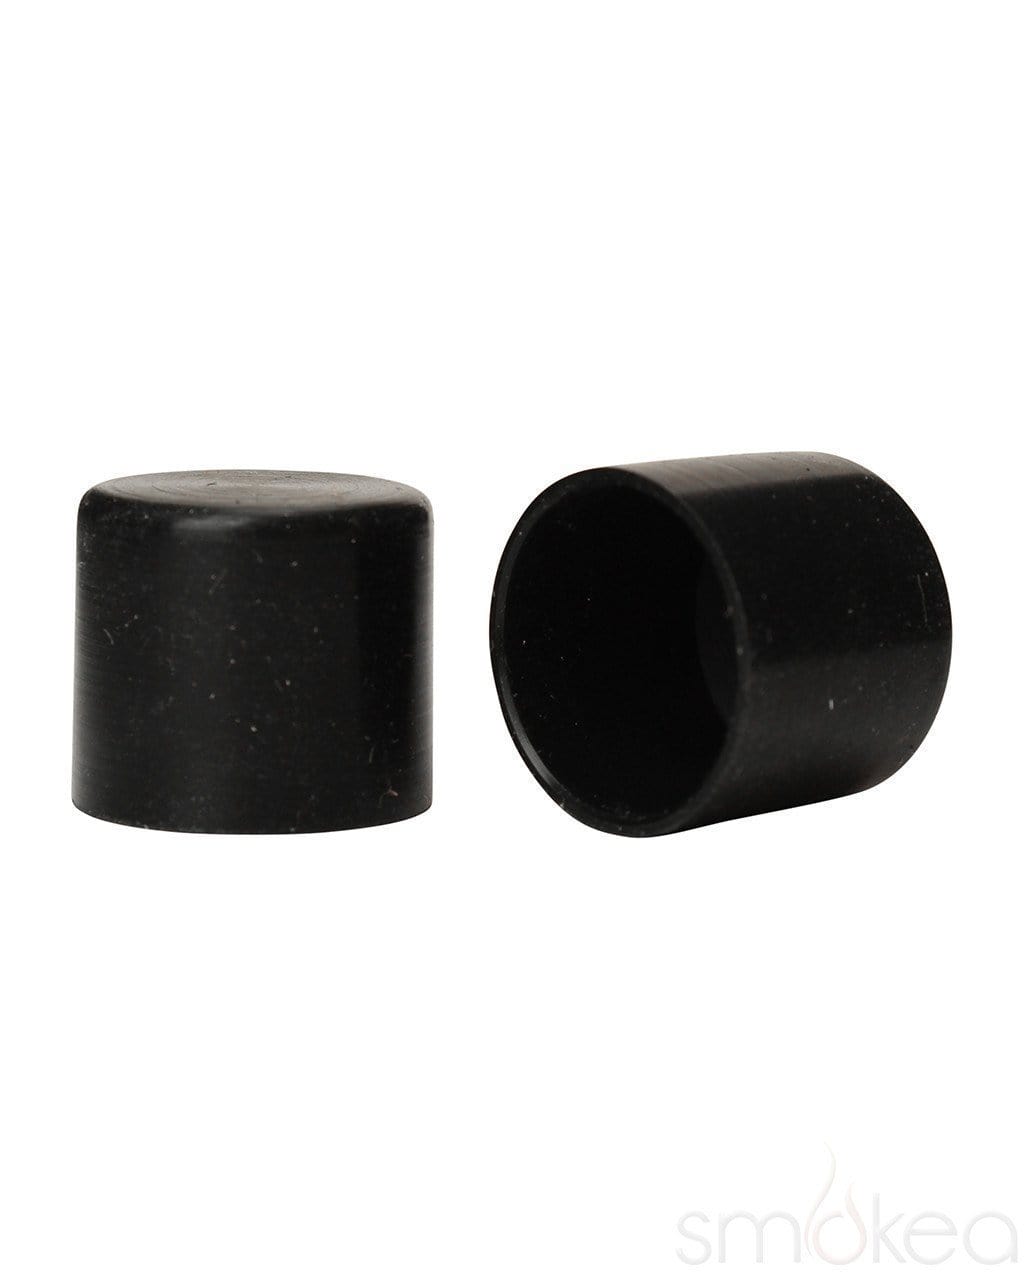 7 Pipe Twisty Glass Blunt Replacement Silicone Caps (2-Pack)